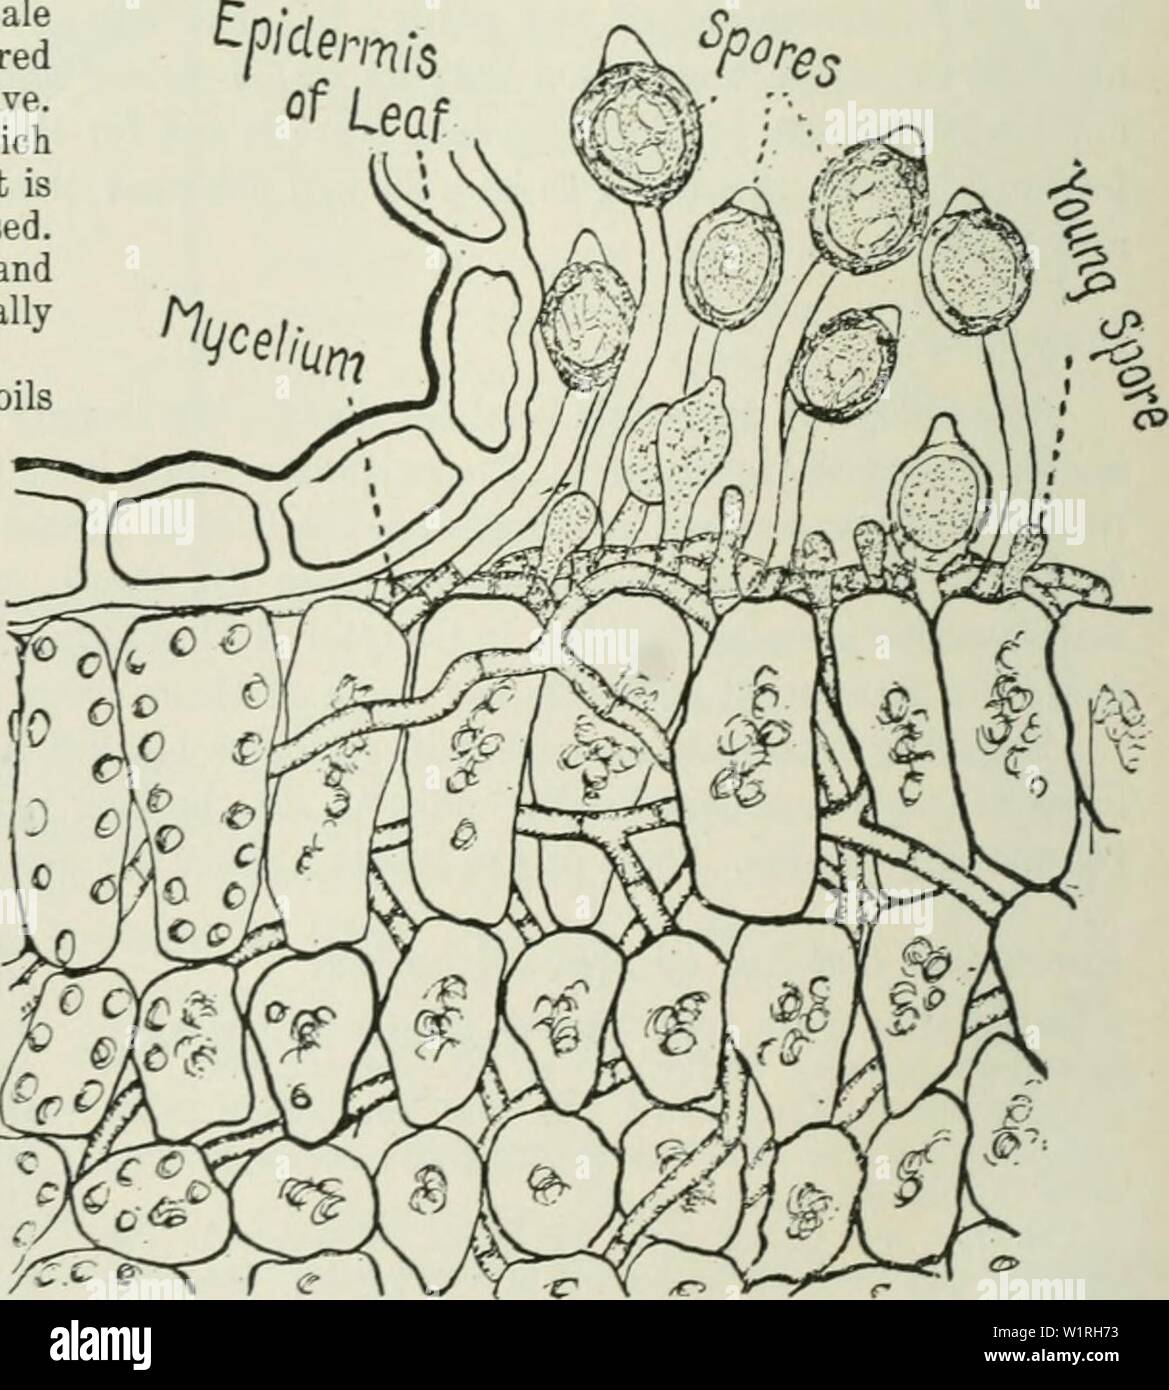 Archive image from page 63 of Cyclopedia of farm crops . Cyclopedia of farm crops : a popular survey of crops and crop-making methods in the United States and Canada  cyclopediaoffarm00bailuoft Year: 1922, c1907 Fig. 56. Spore-bearing stalks of a wilt fungus (Acrostalagmus albns). In this fungus the spores are borne in lieads: some of the heads are ruptured at the right. (After Van Hook.) Kerosene Emulsion.âHard, soft or whale-oil soap,  pound ; boiling soft water, 1 gallon ; kerosene, 2 gallons. Dissolve the soap in the water, add the kerosene and chum with a pump for 5 to 10 minutes. Dilute Stock Photo